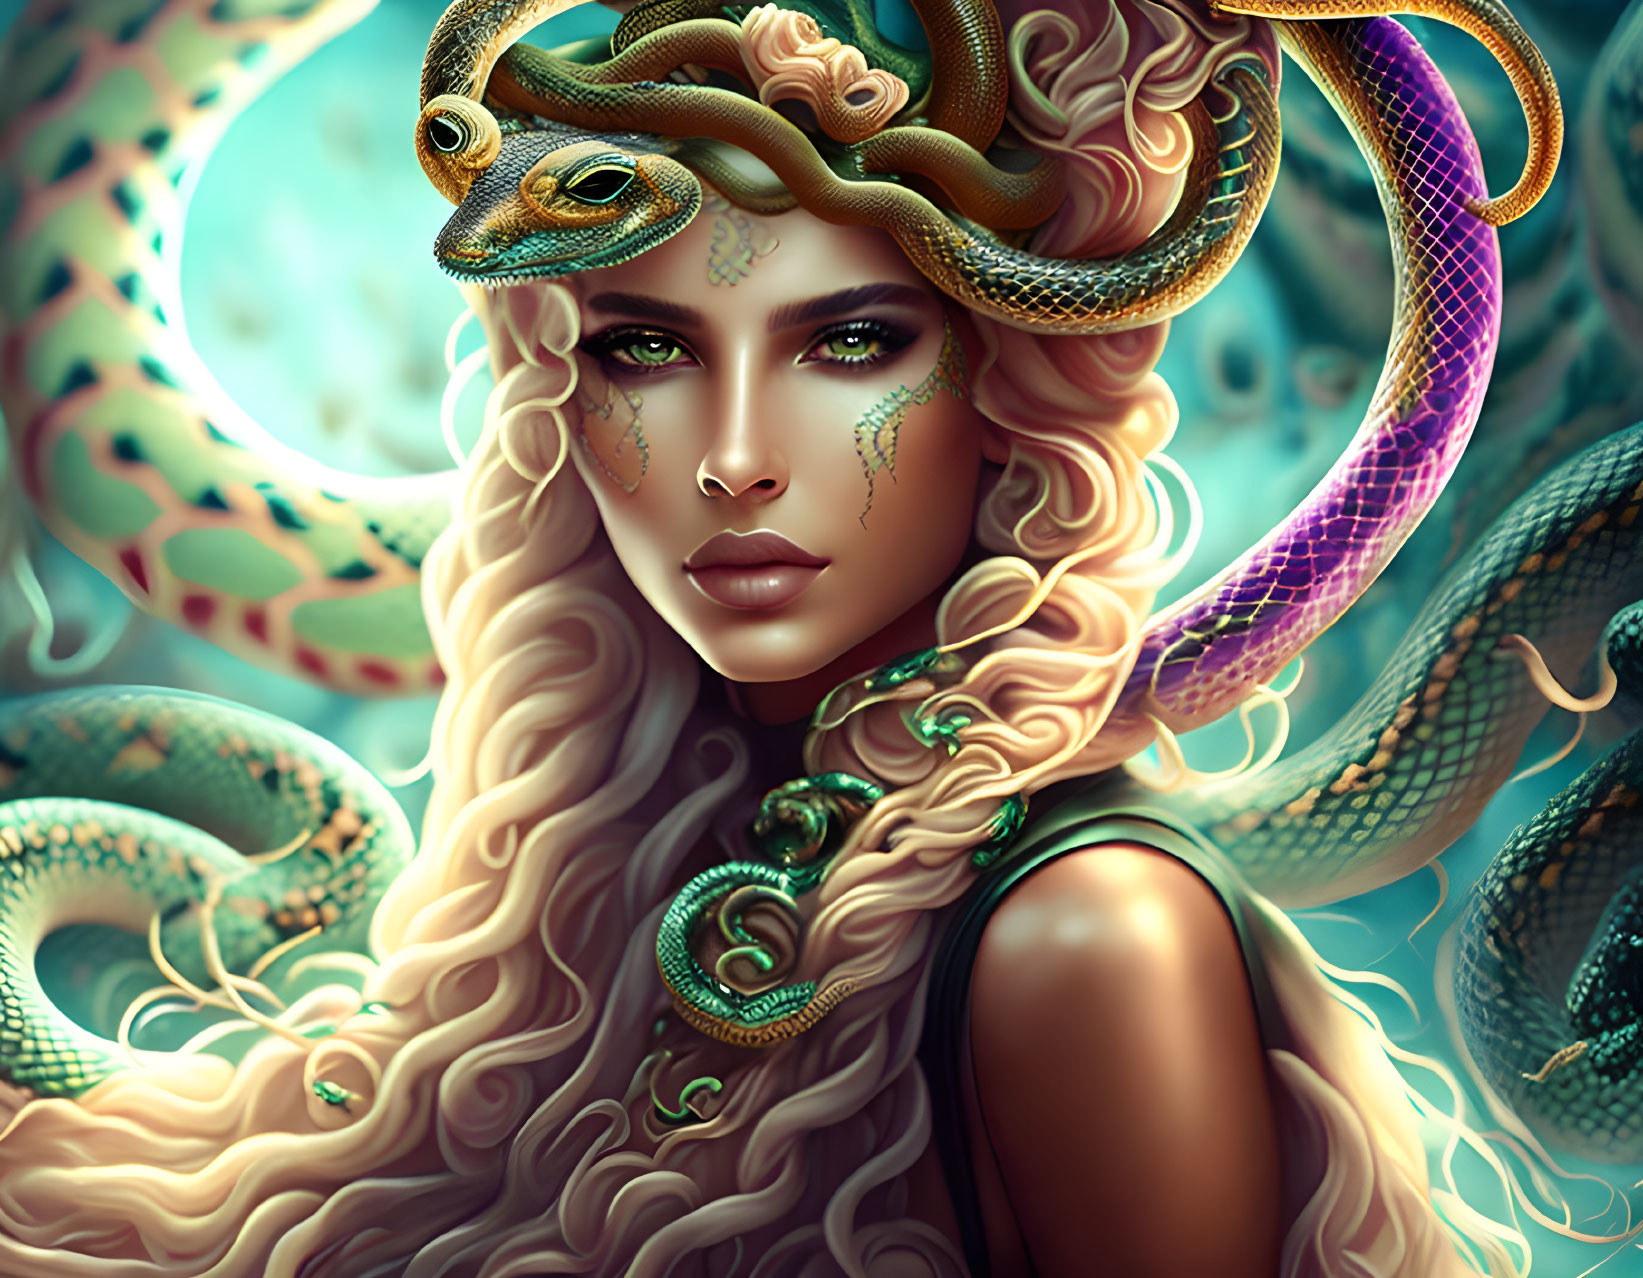  Medusa, her bewitching reptilian charm